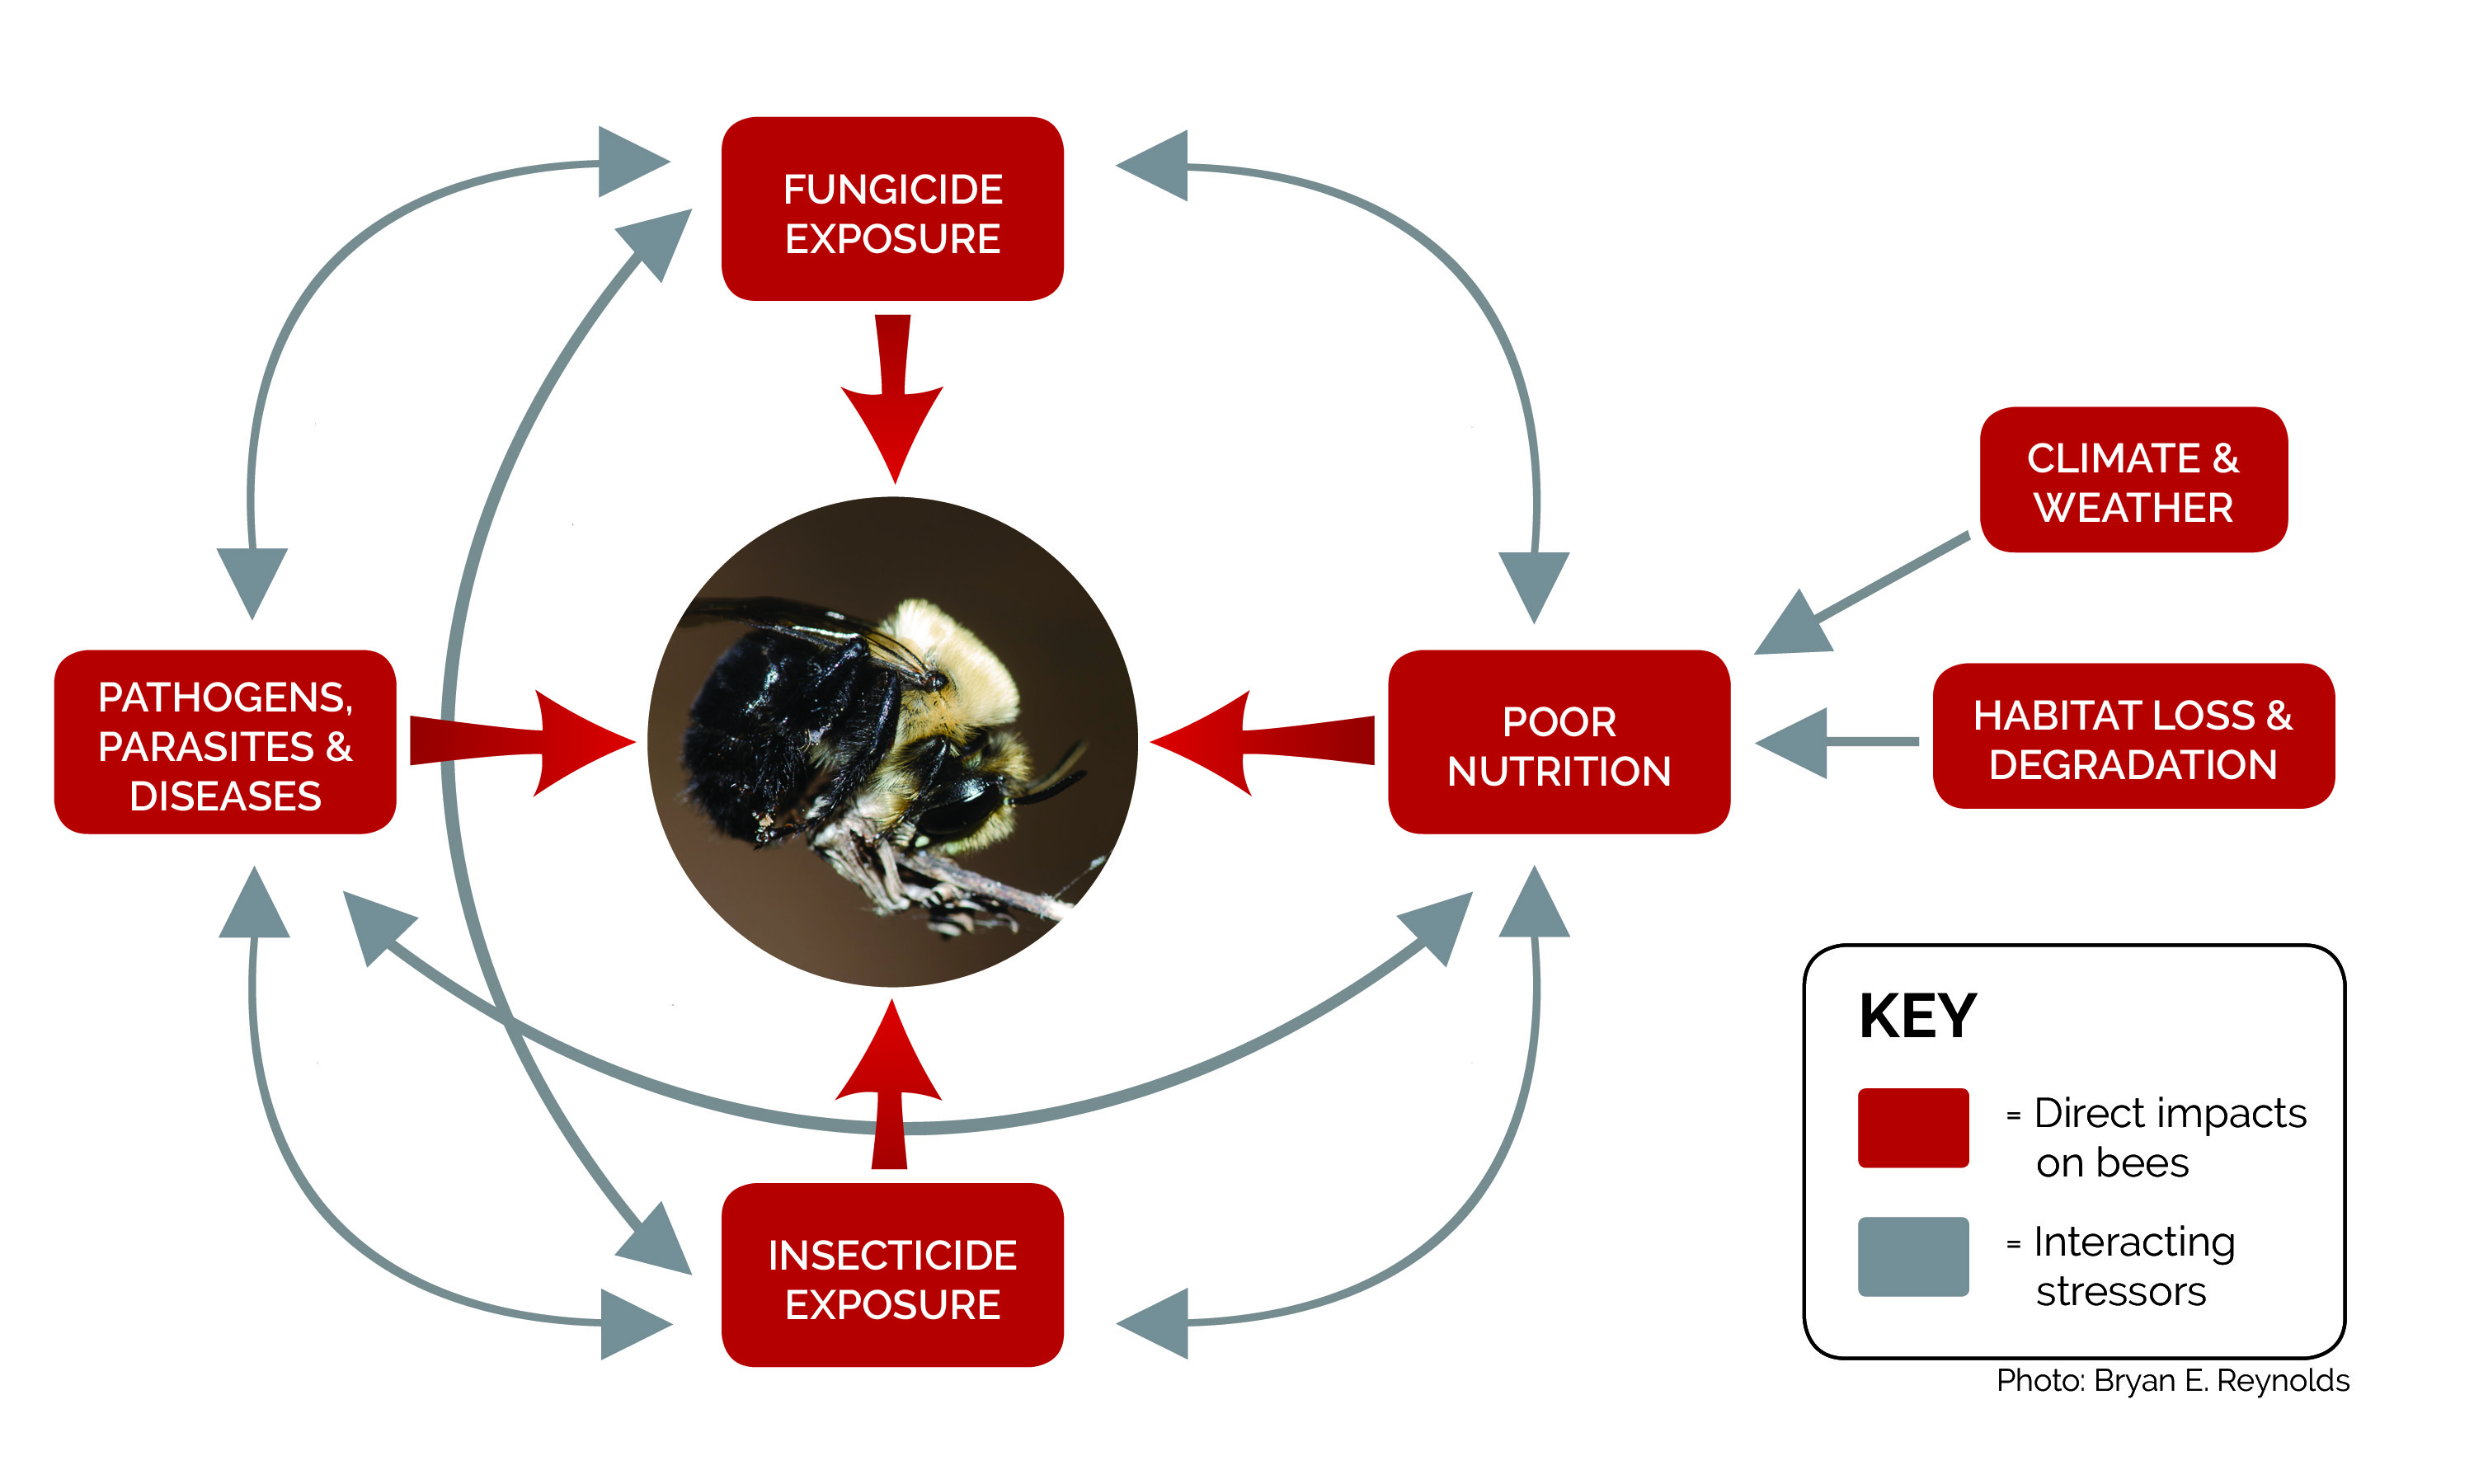 This diagram shows various interacting stressors that can impact bees and other pollinators, including fungicides.